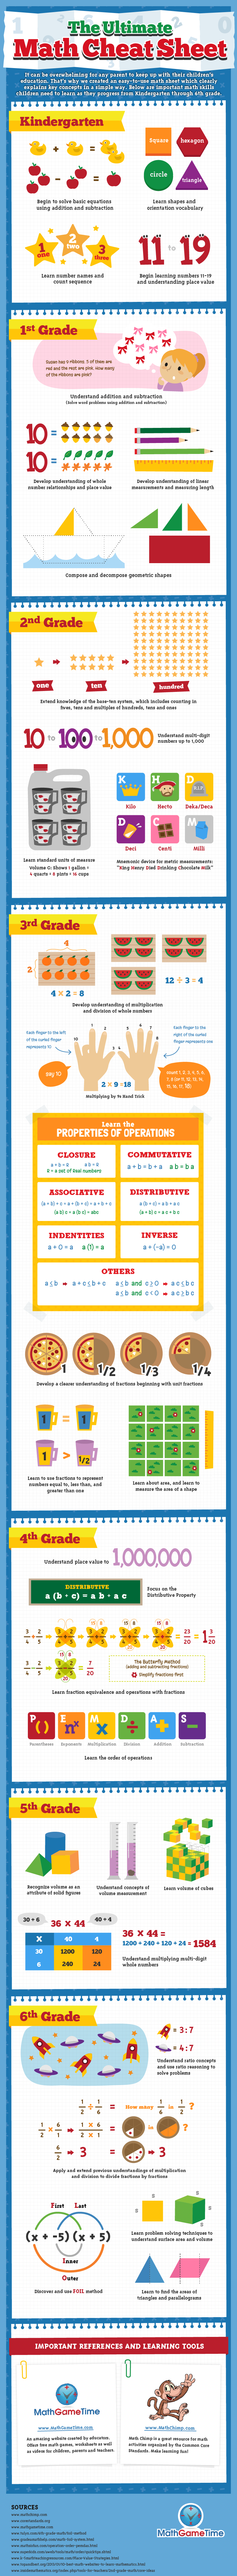 The-Ultimate-Math-Cheat-Sheet-Infographic